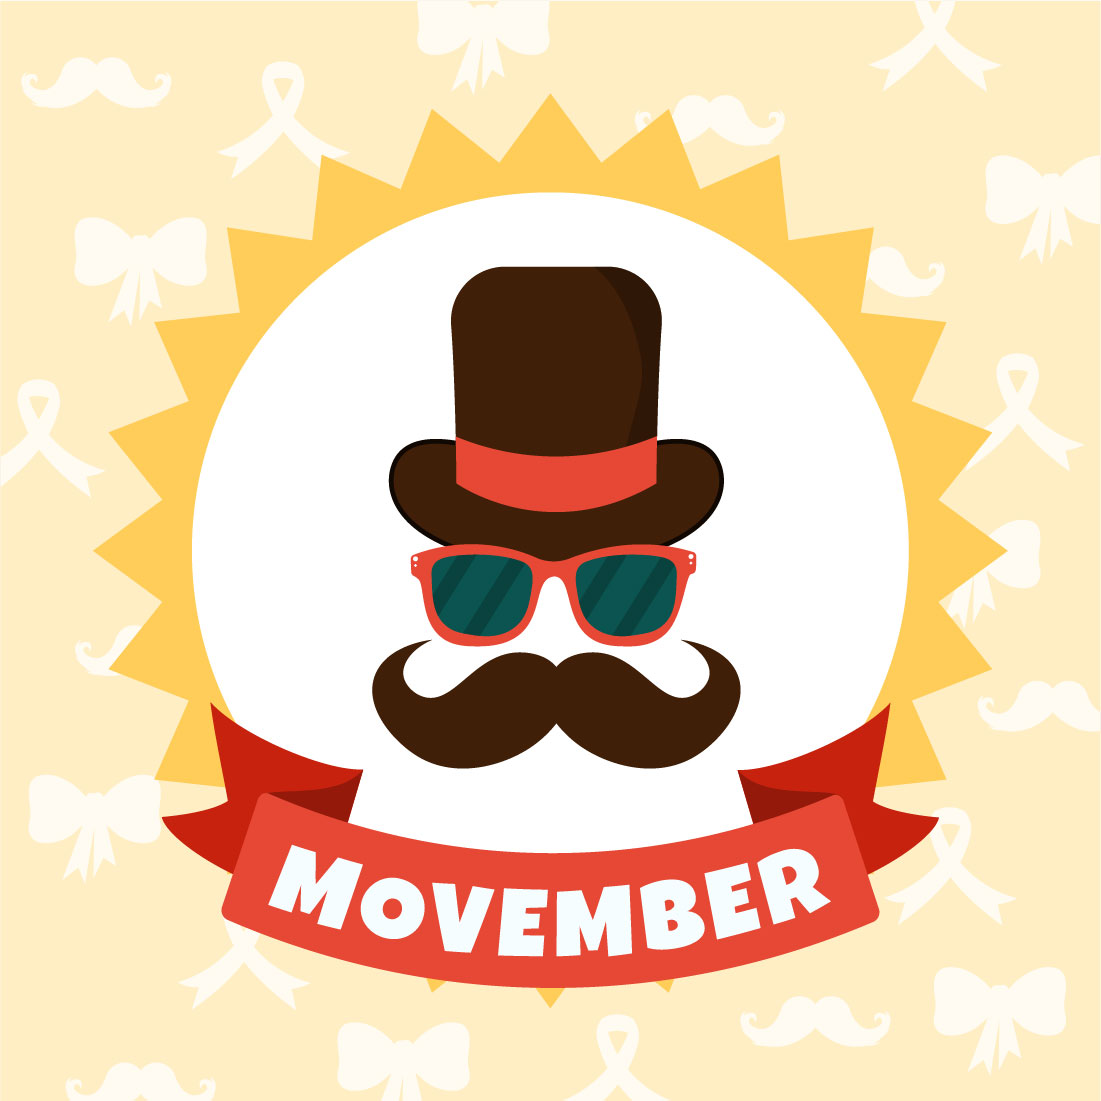 7 Movember Time Vector Illustration cover image.